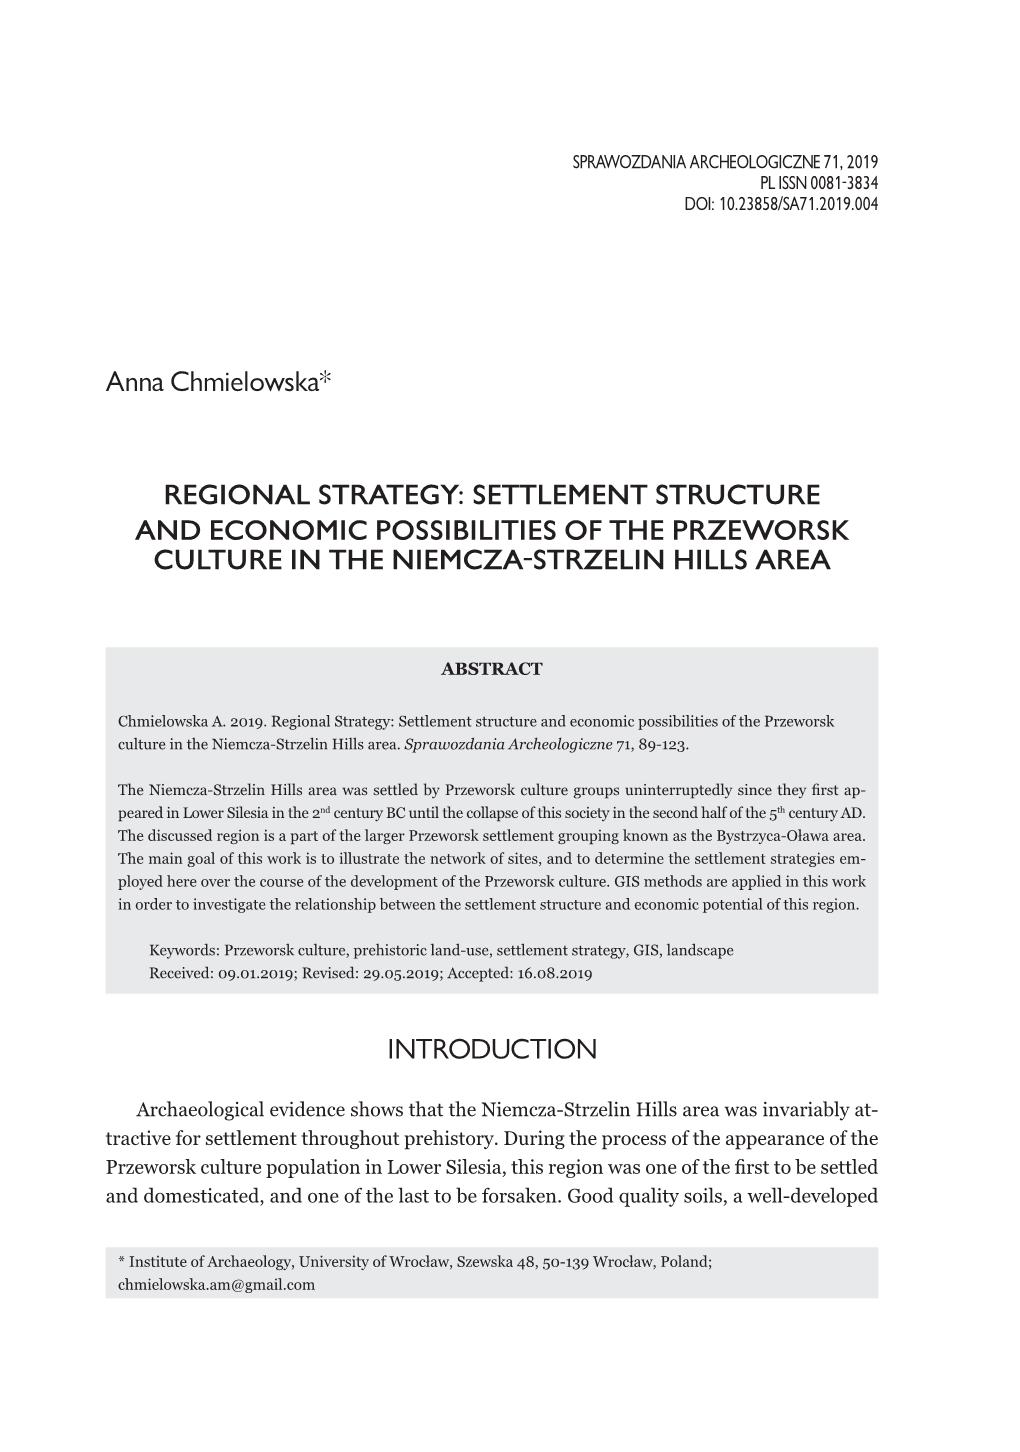 Settlement Structure and Economic Possibilities of the Przeworsk Culture in the Niemcza-Strzelin Hills Area